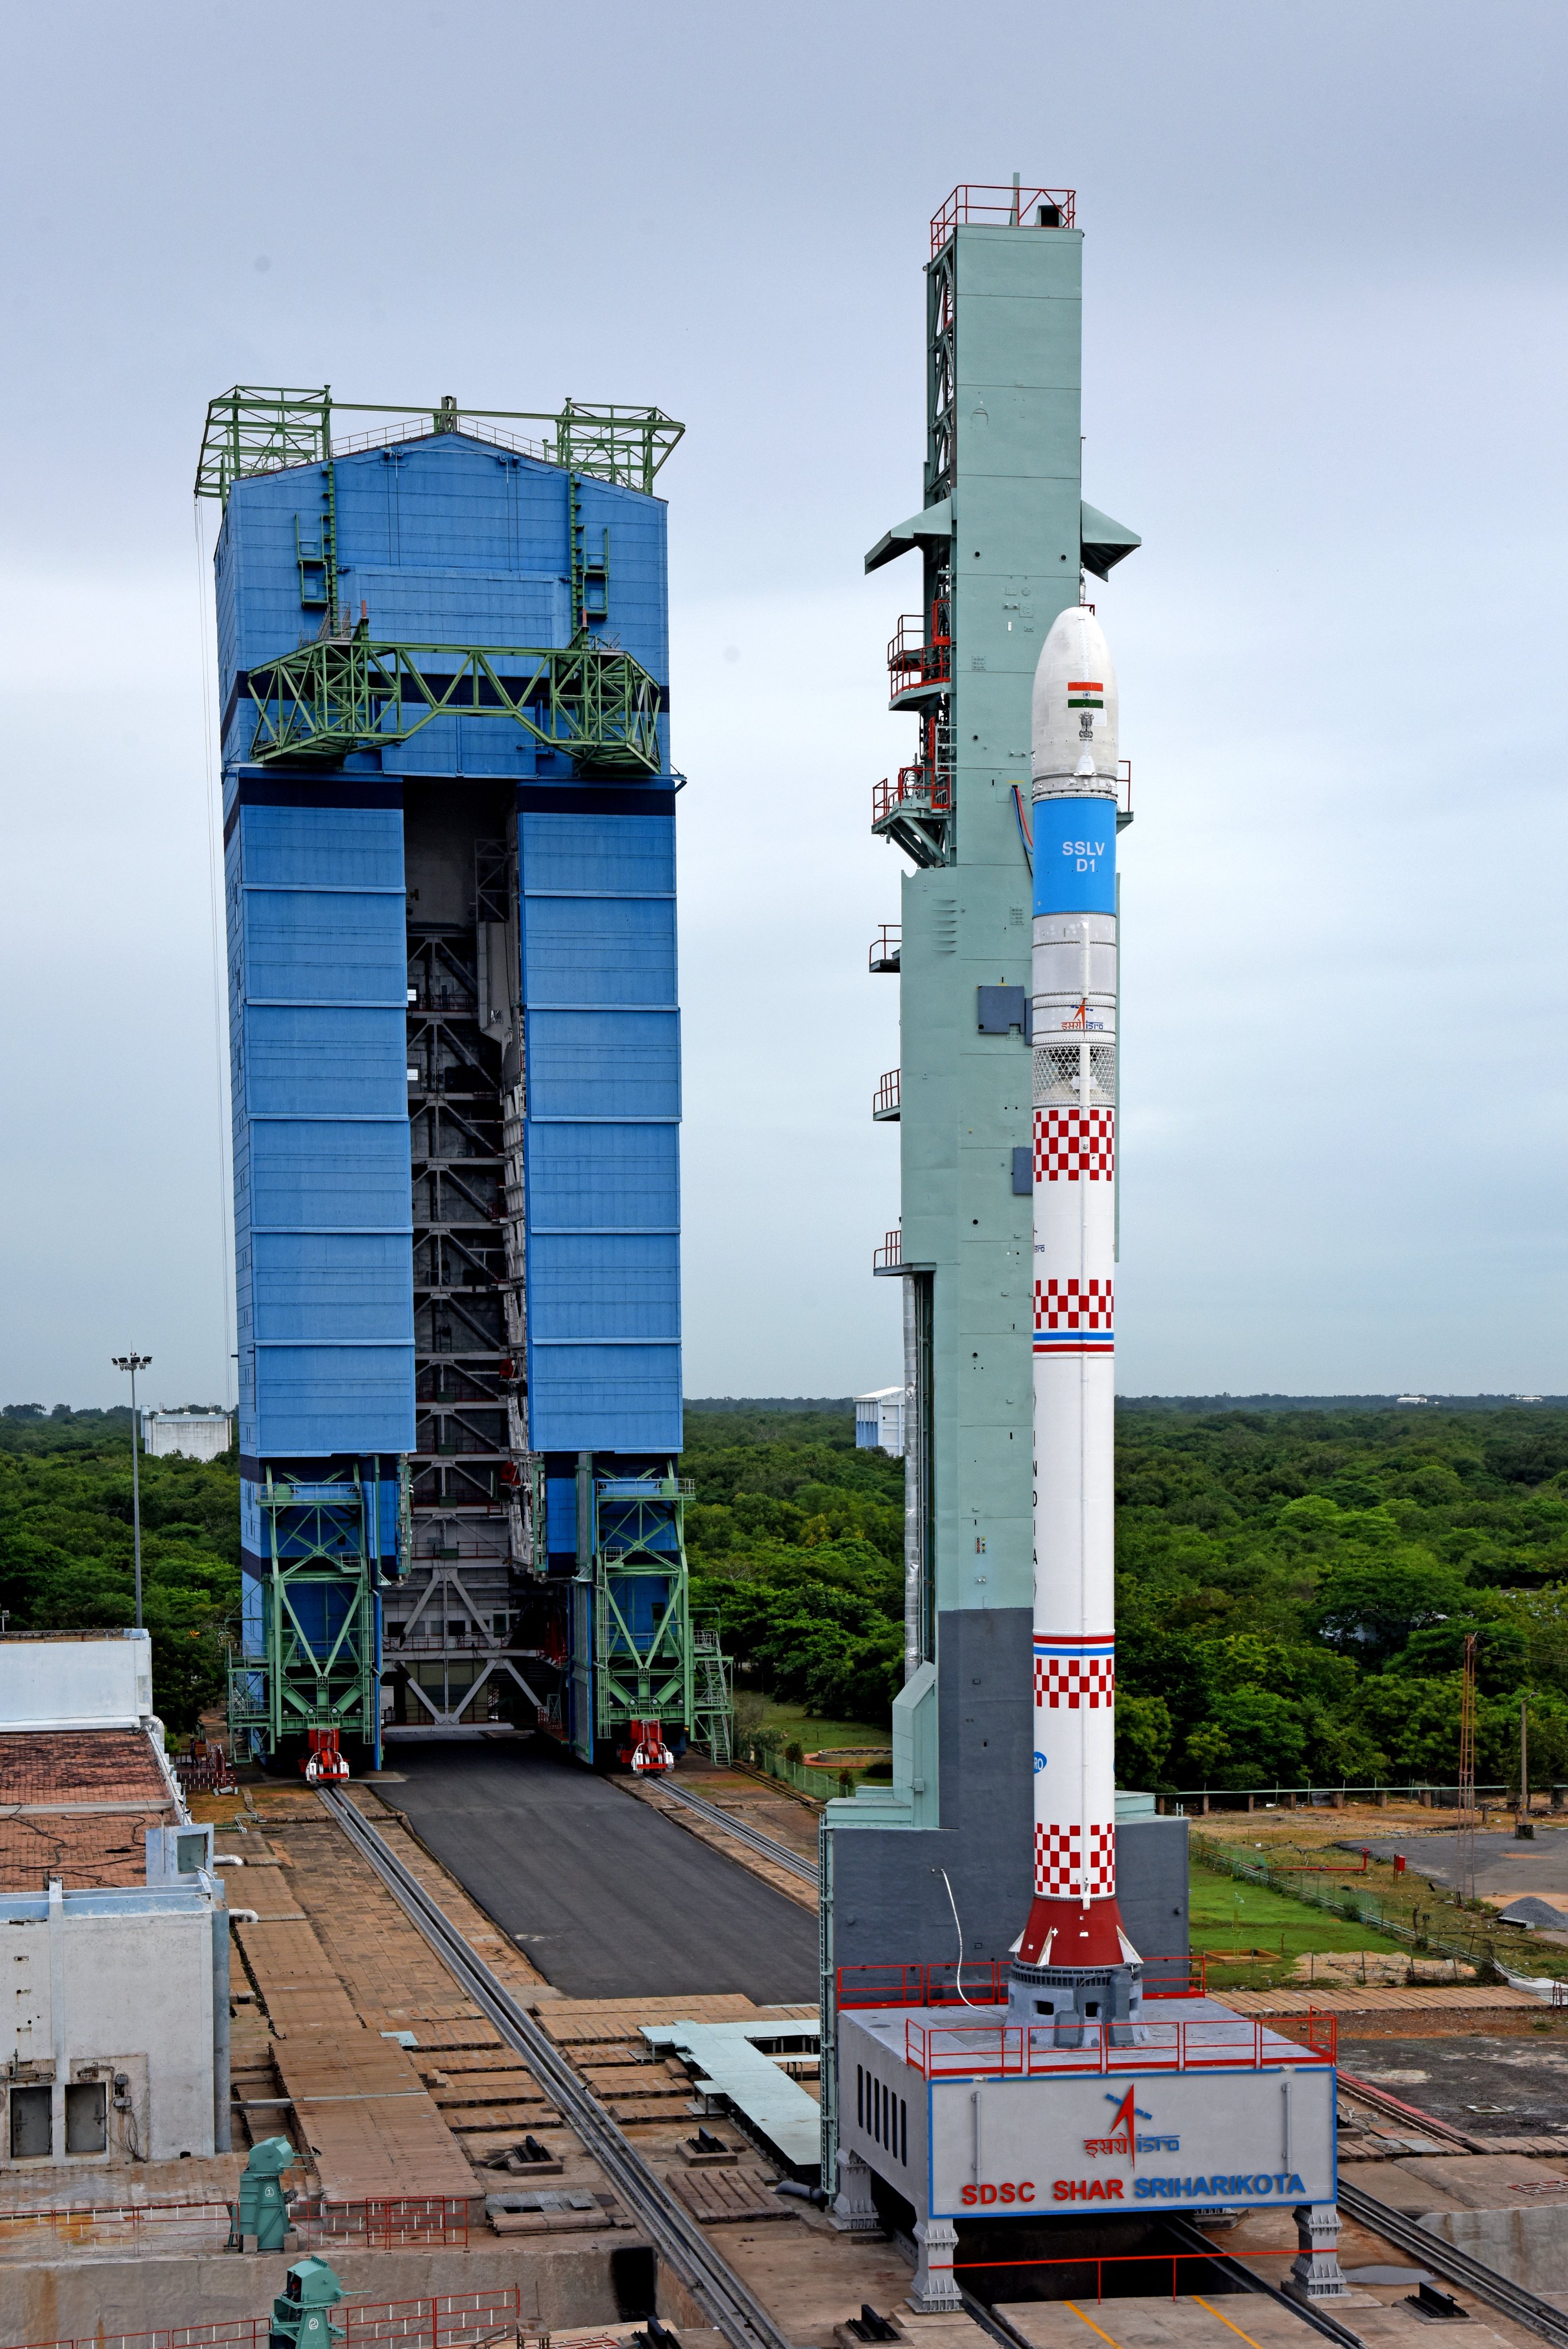 Science News Roundup: India's offer to privatise rocket has 20 potential bidders